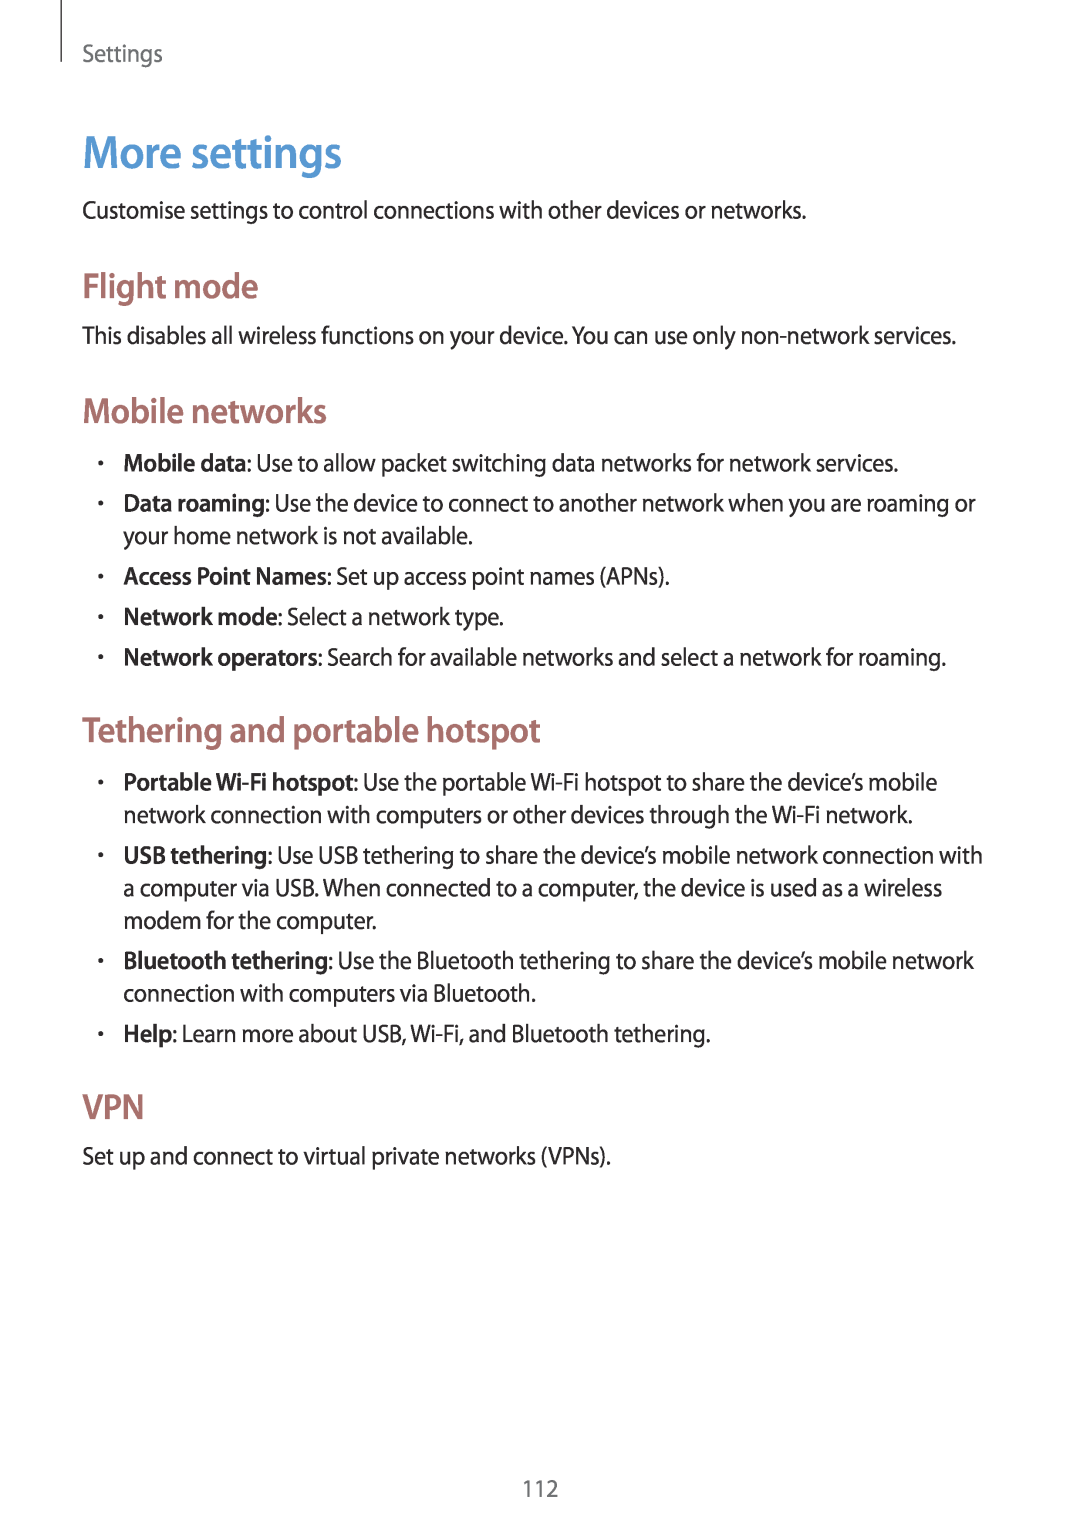 Samsung GT-N5100 user manual More settings, Flight mode, Mobile networks, Tethering and portable hotspot, Settings 